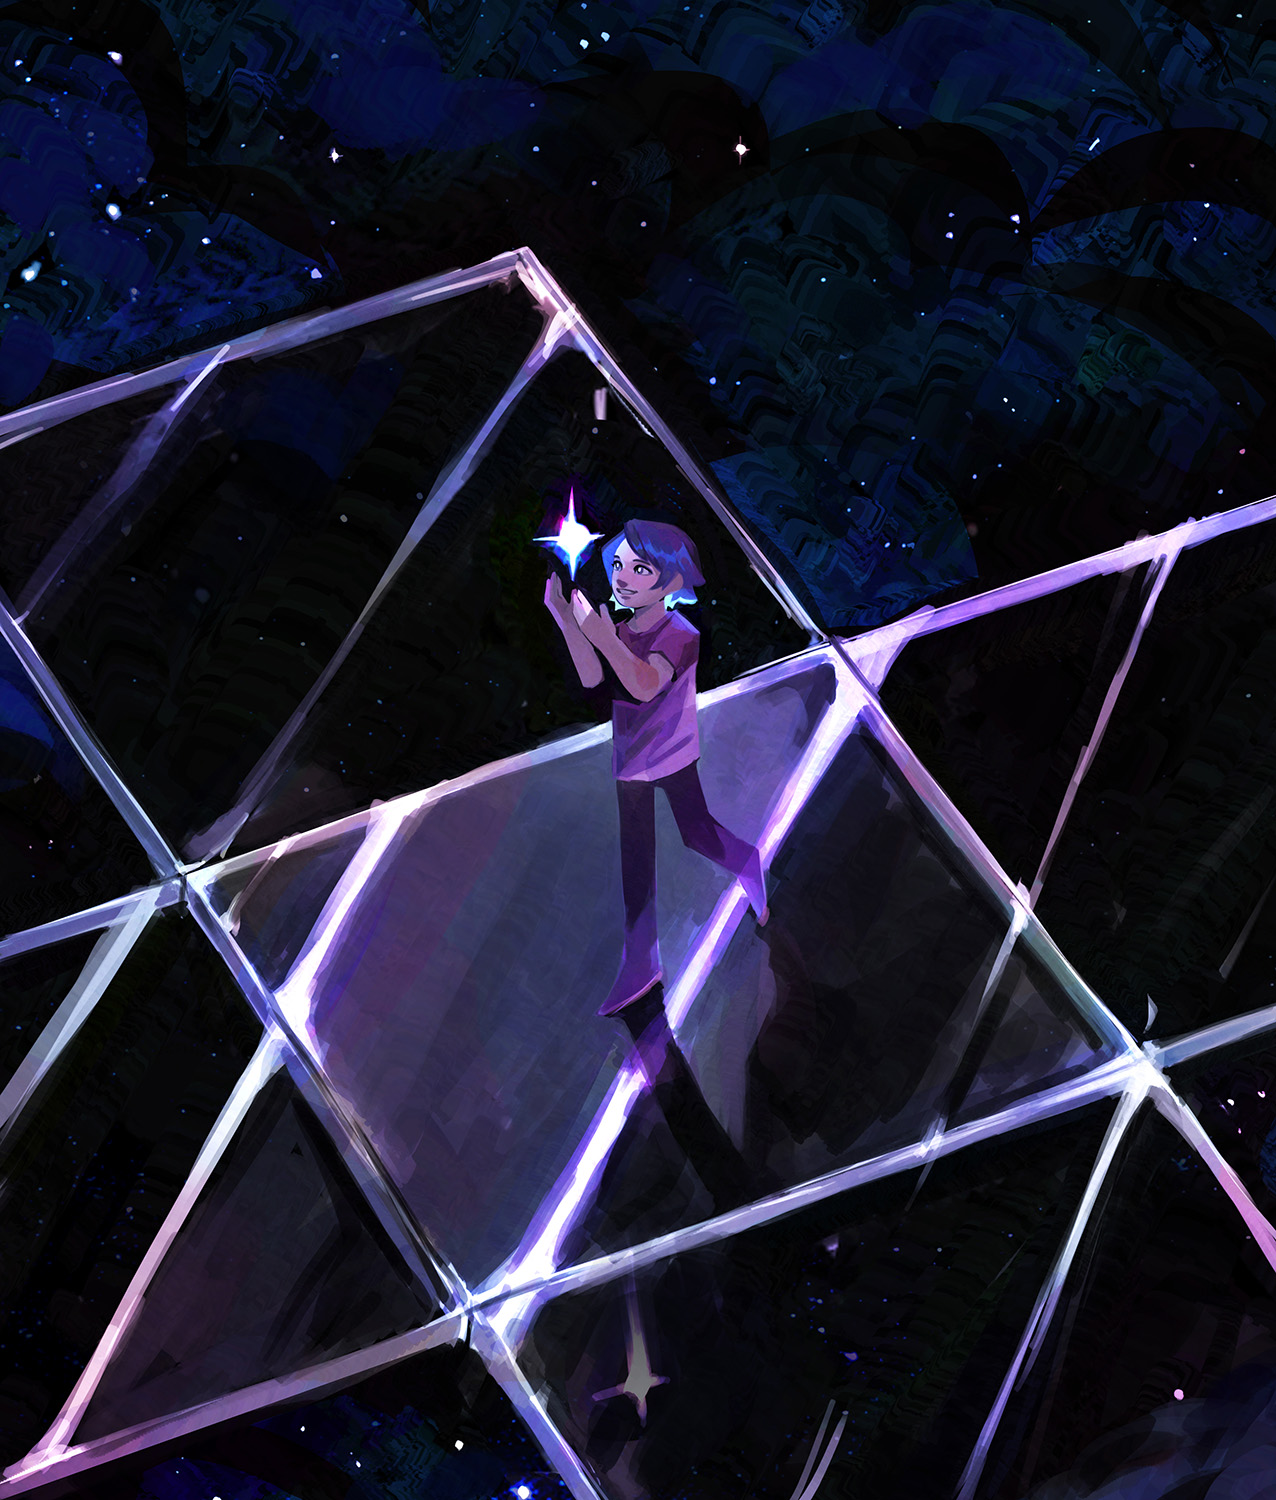 A girl standing on an open glass box holding a star.